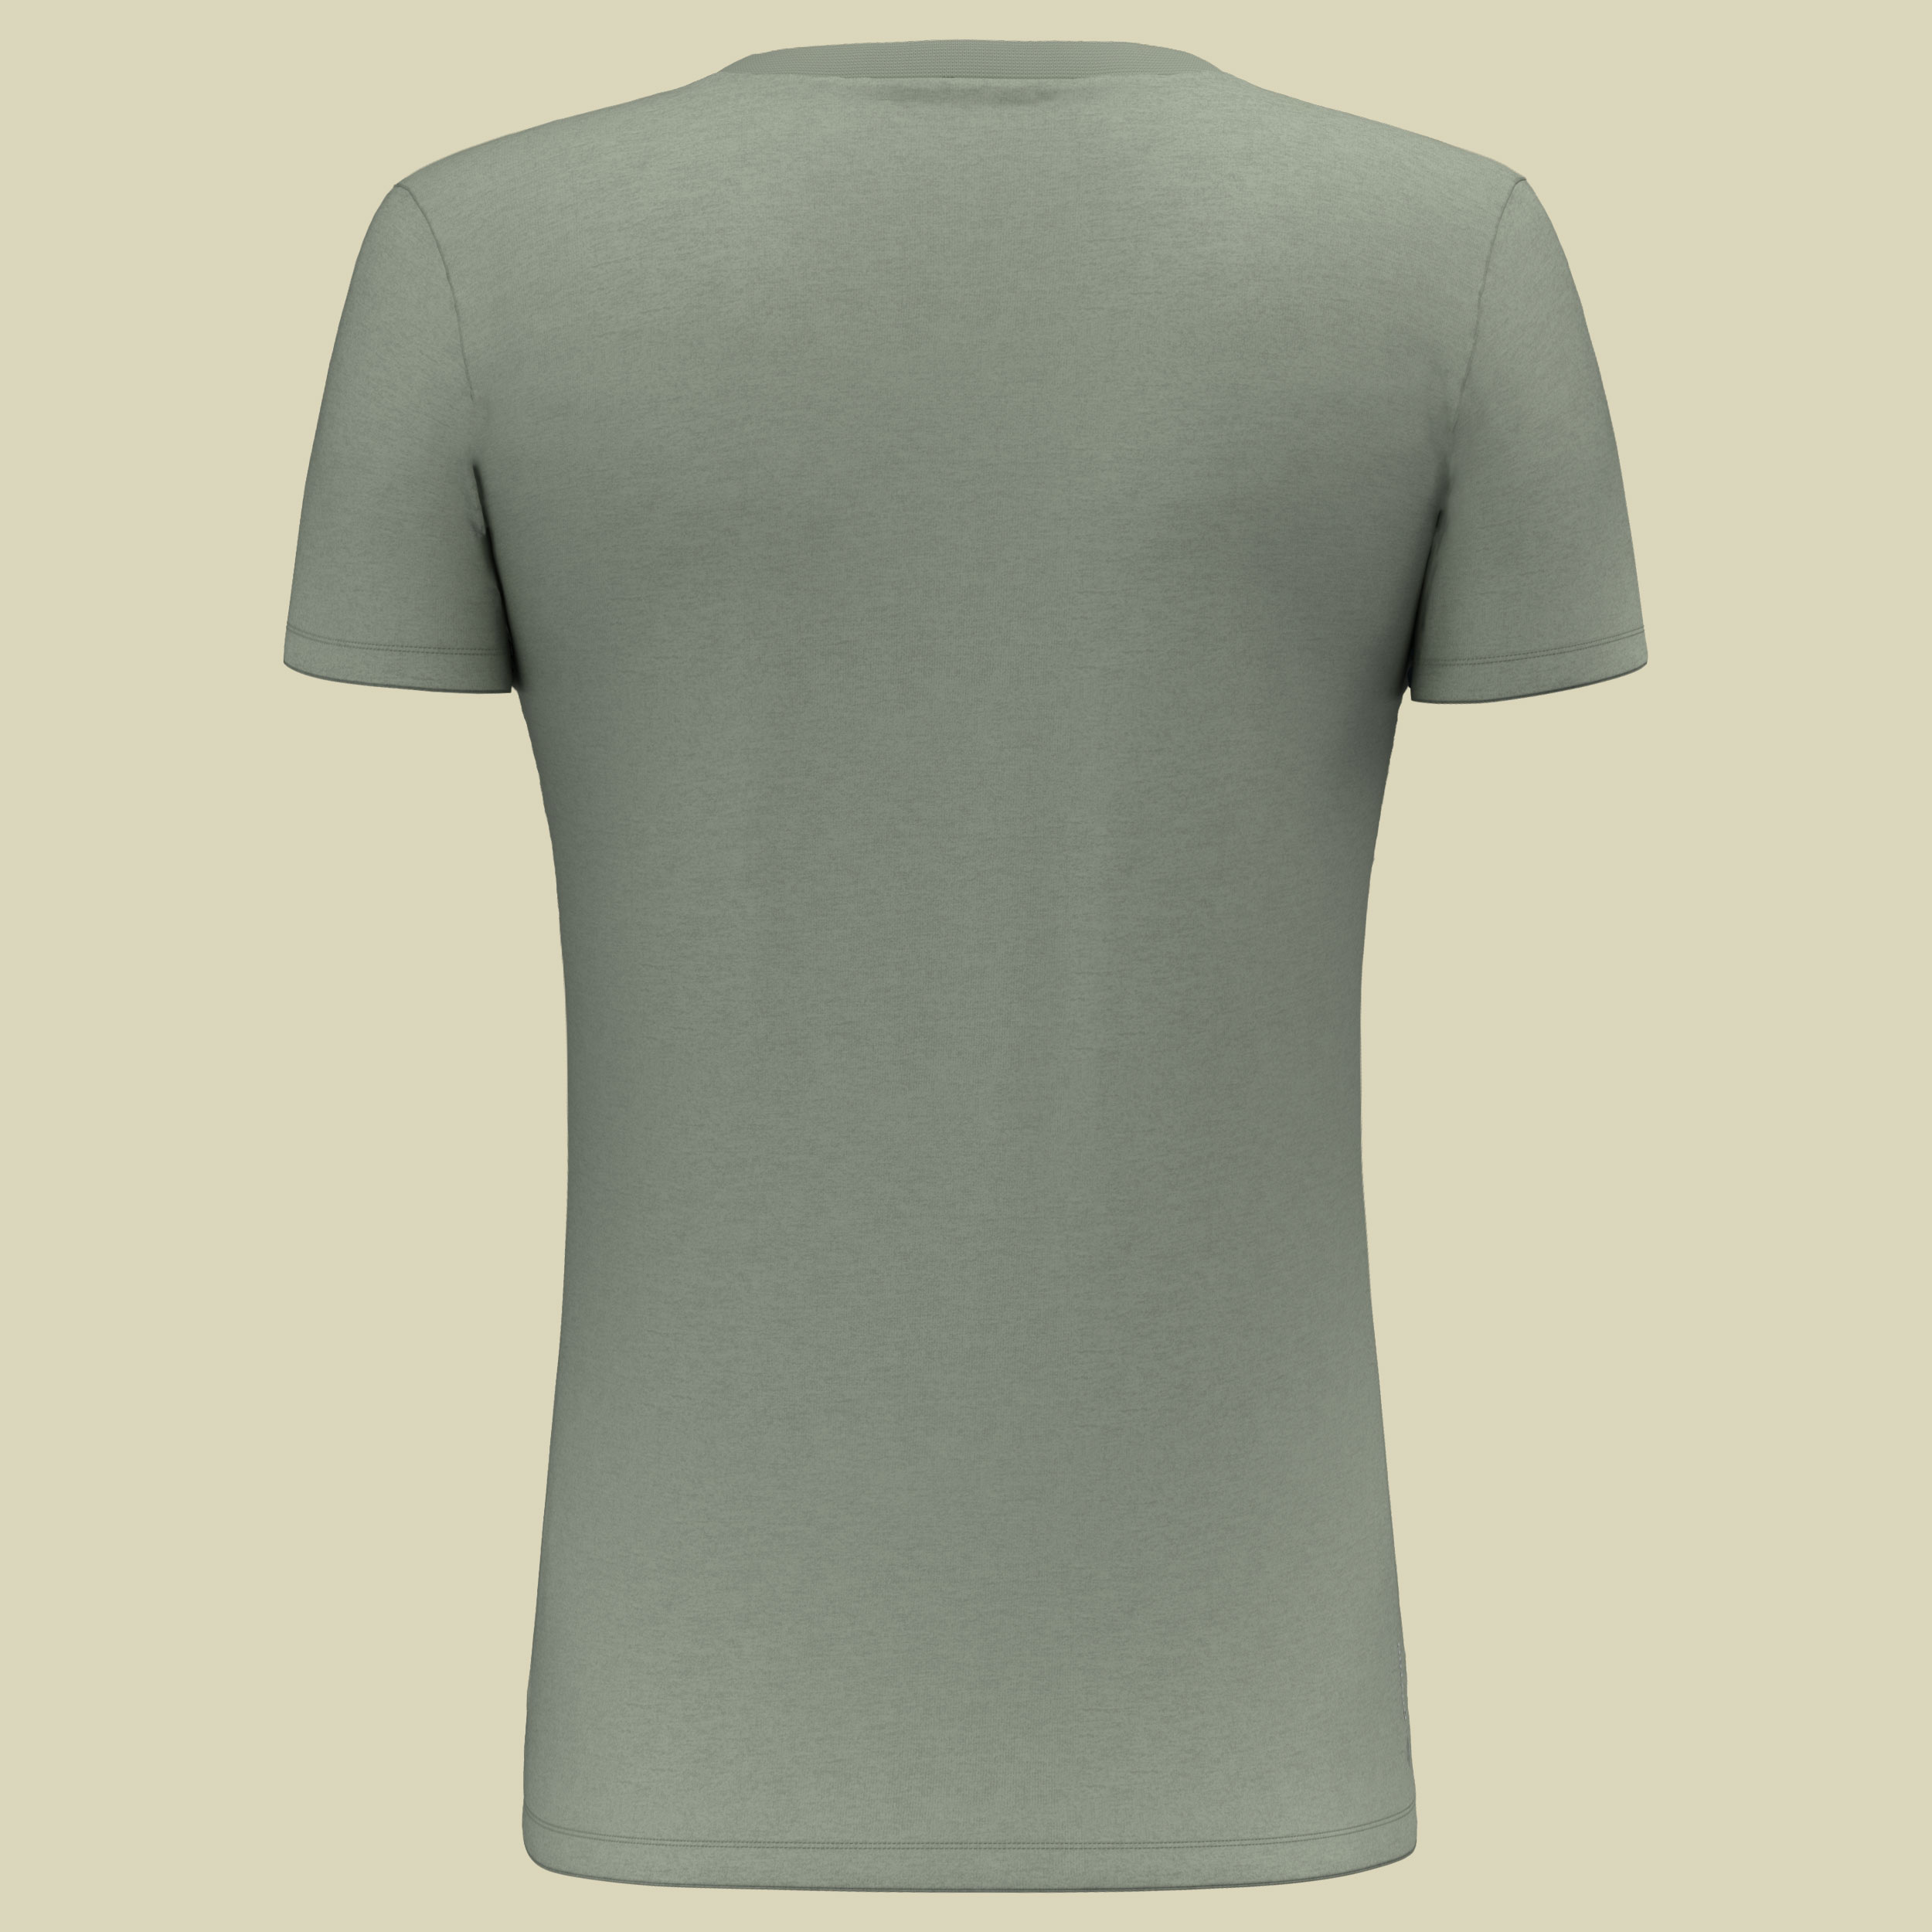 SOLID Dry S/S Tee Women Größe 40 Farbe shadow